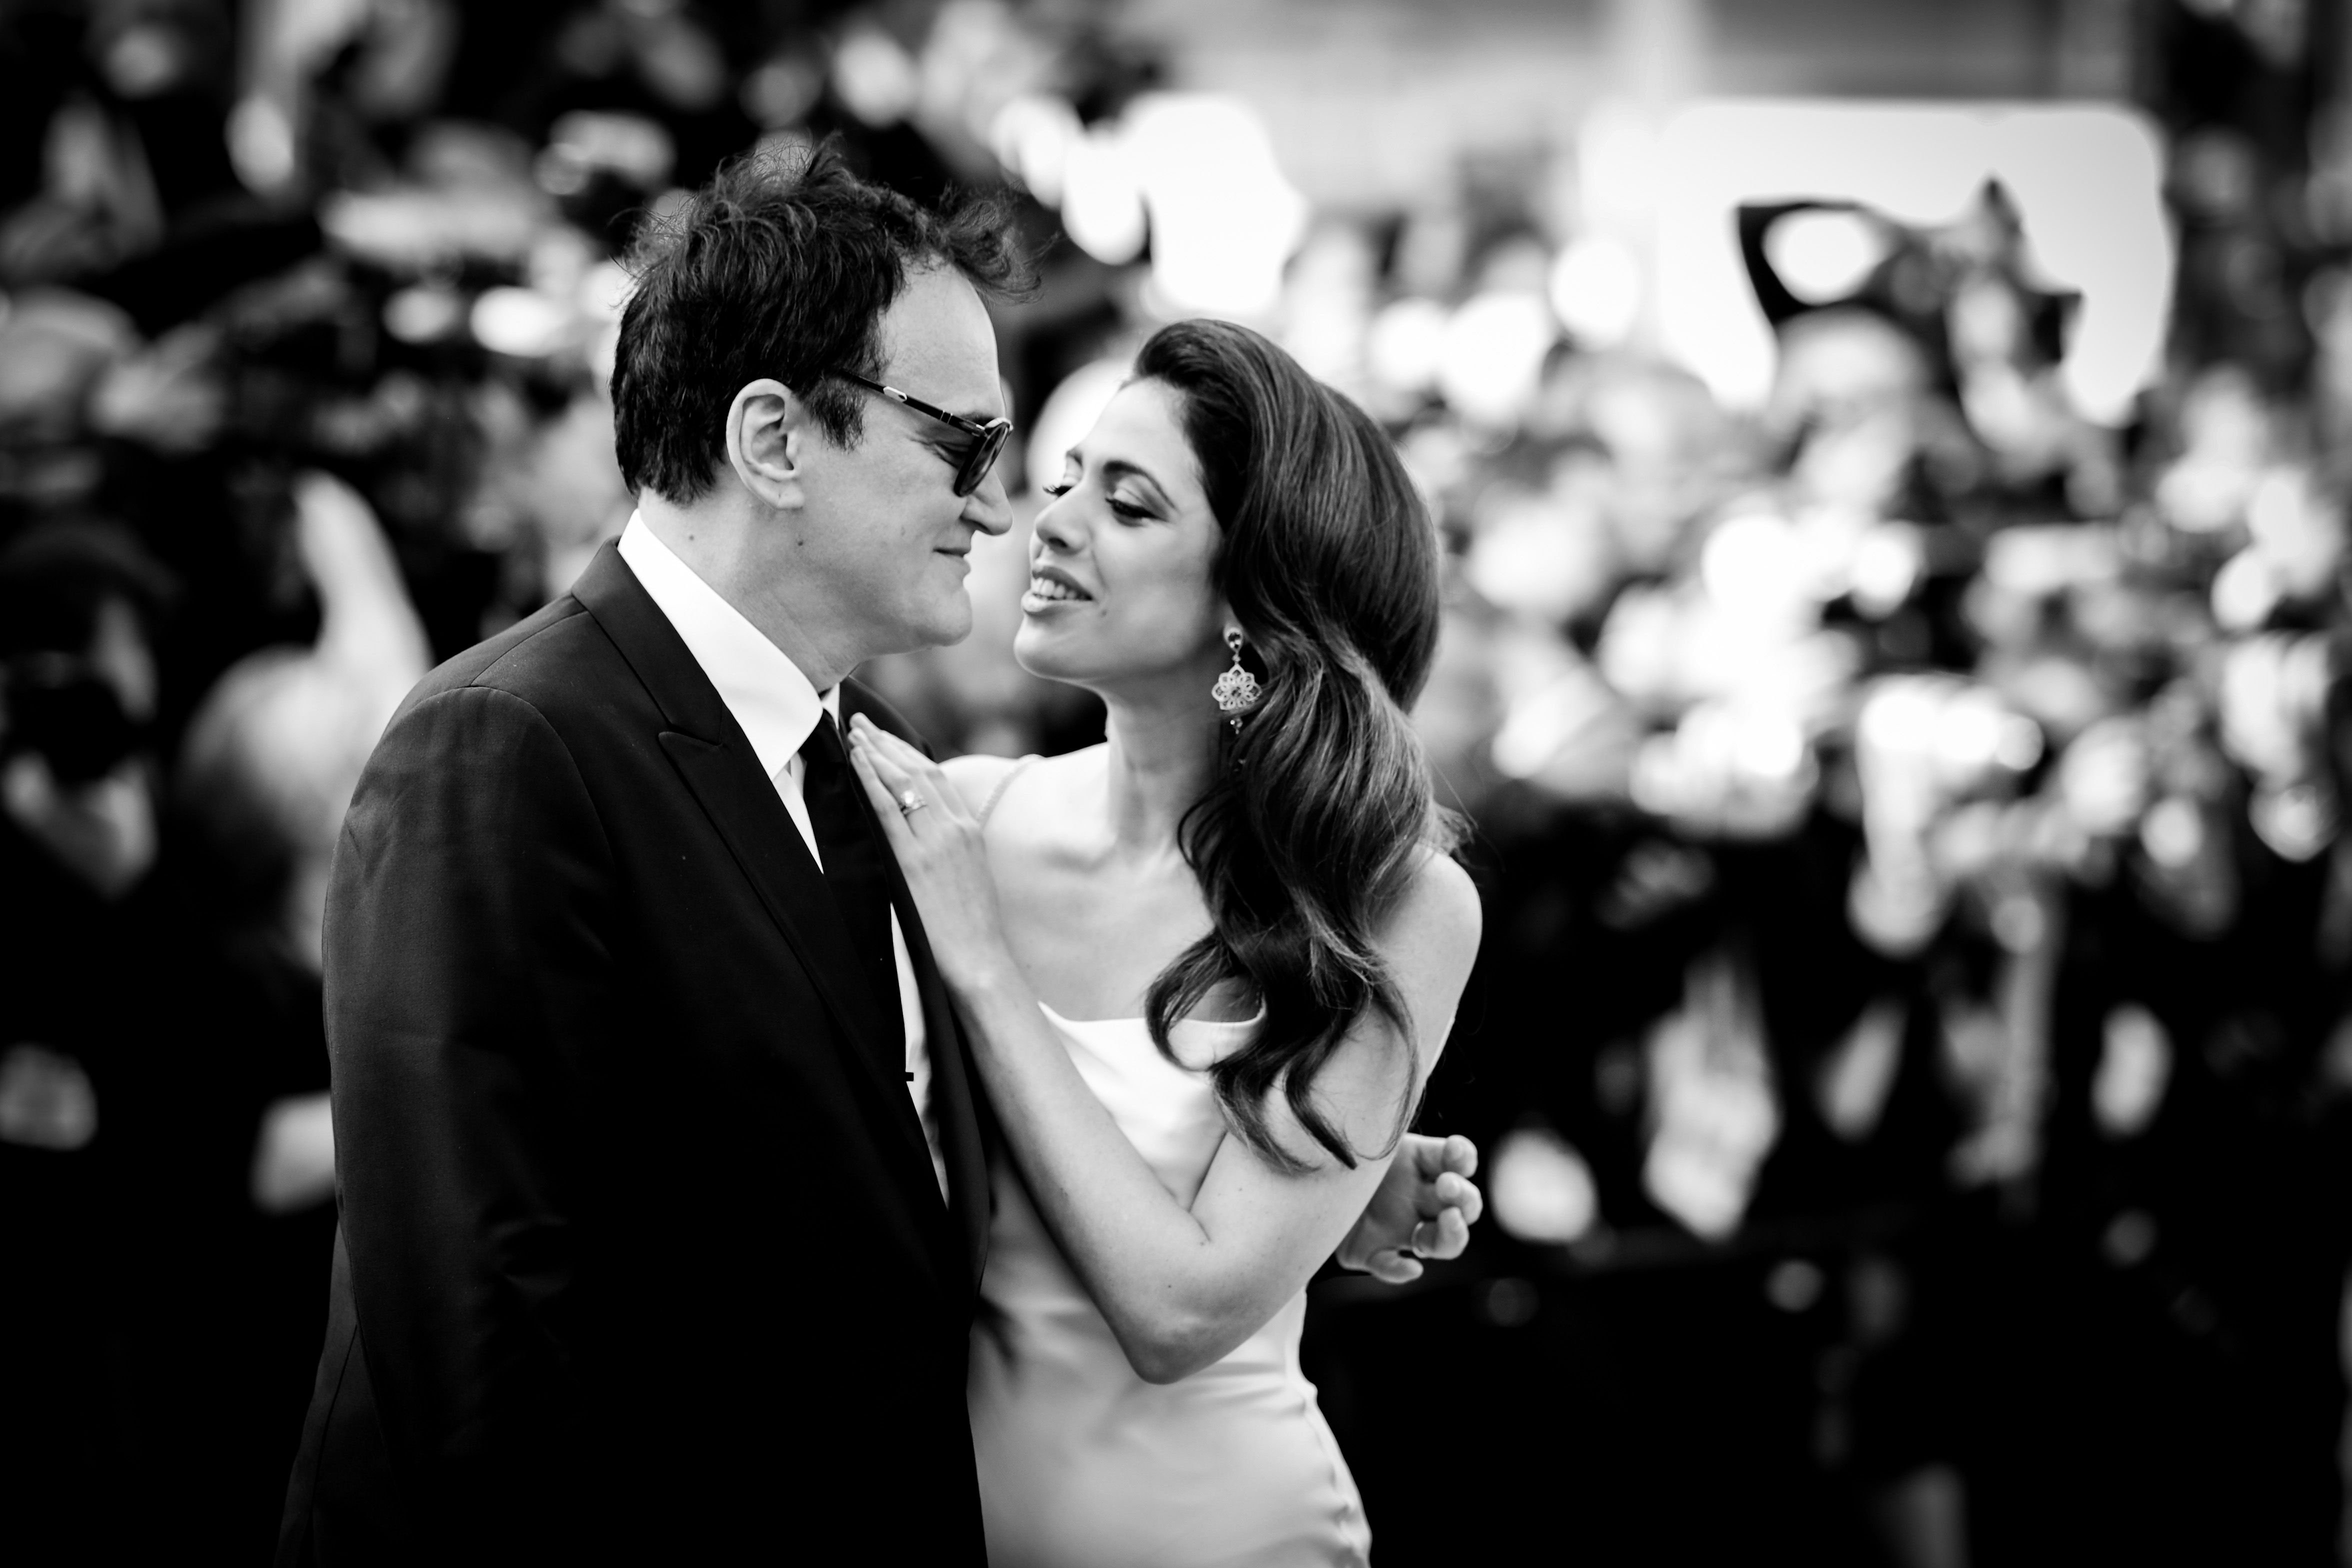 Quentin Tarantino and Daniella Tarantino at the 72nd annual Cannes Film Festival in 2019 in Cannes, France | Source: Getty Images